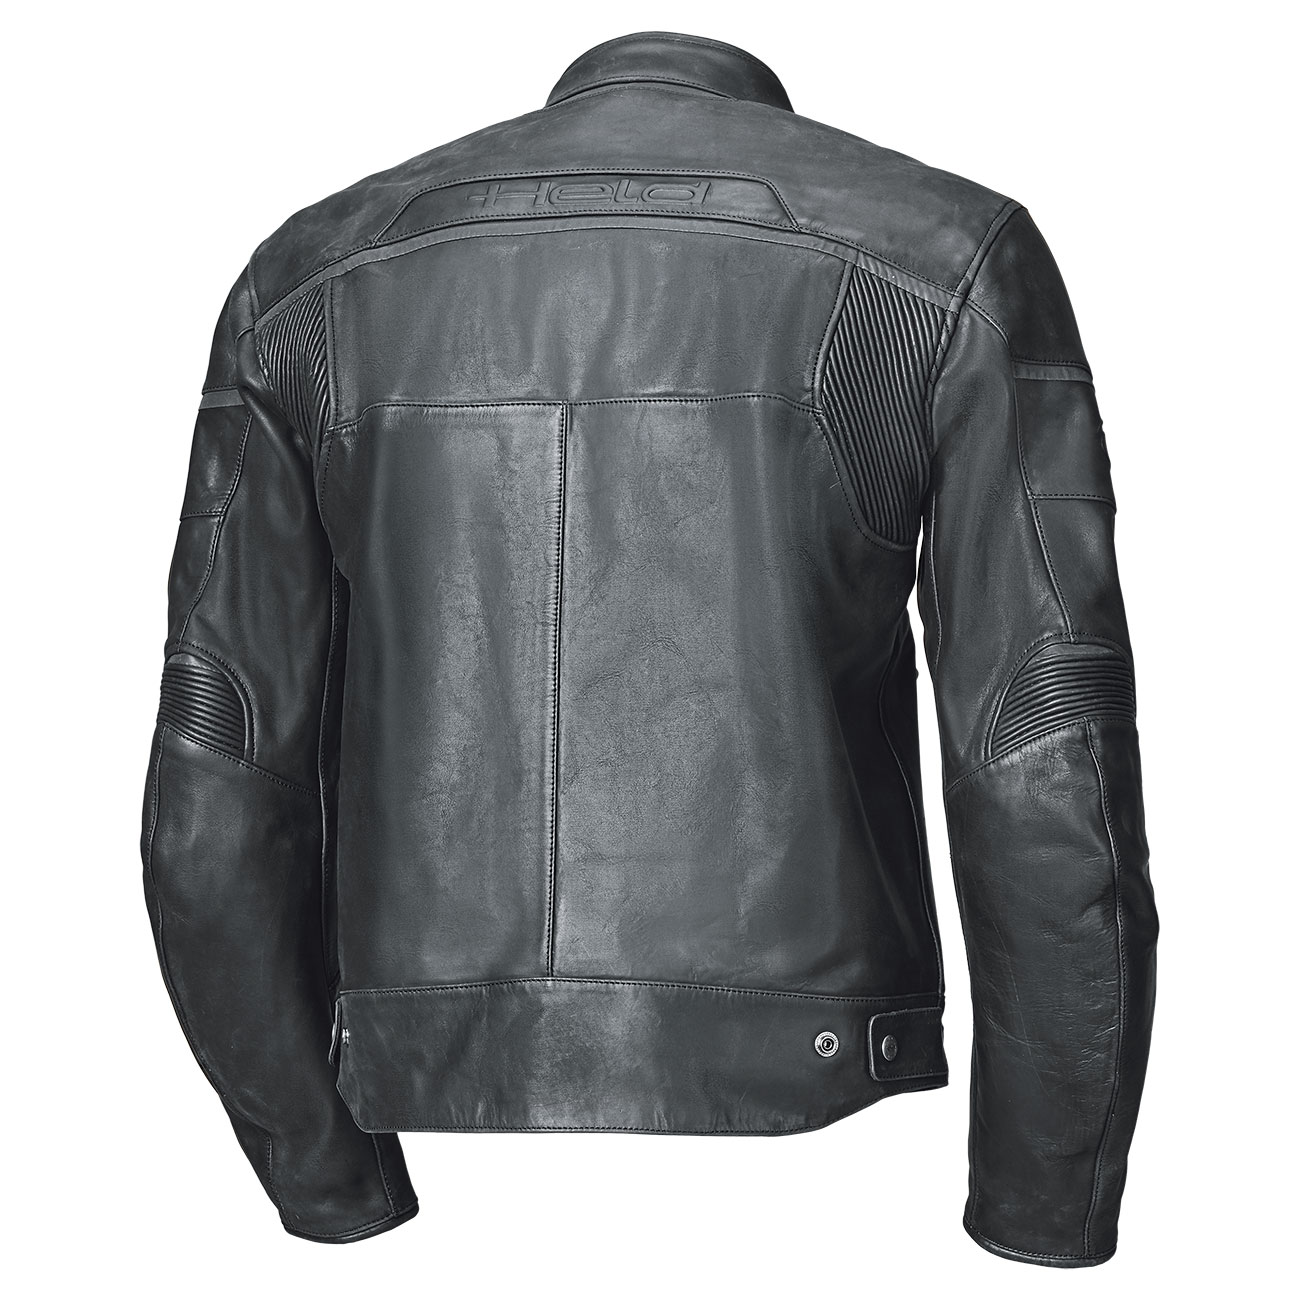 Cosmo WR Touring jacket